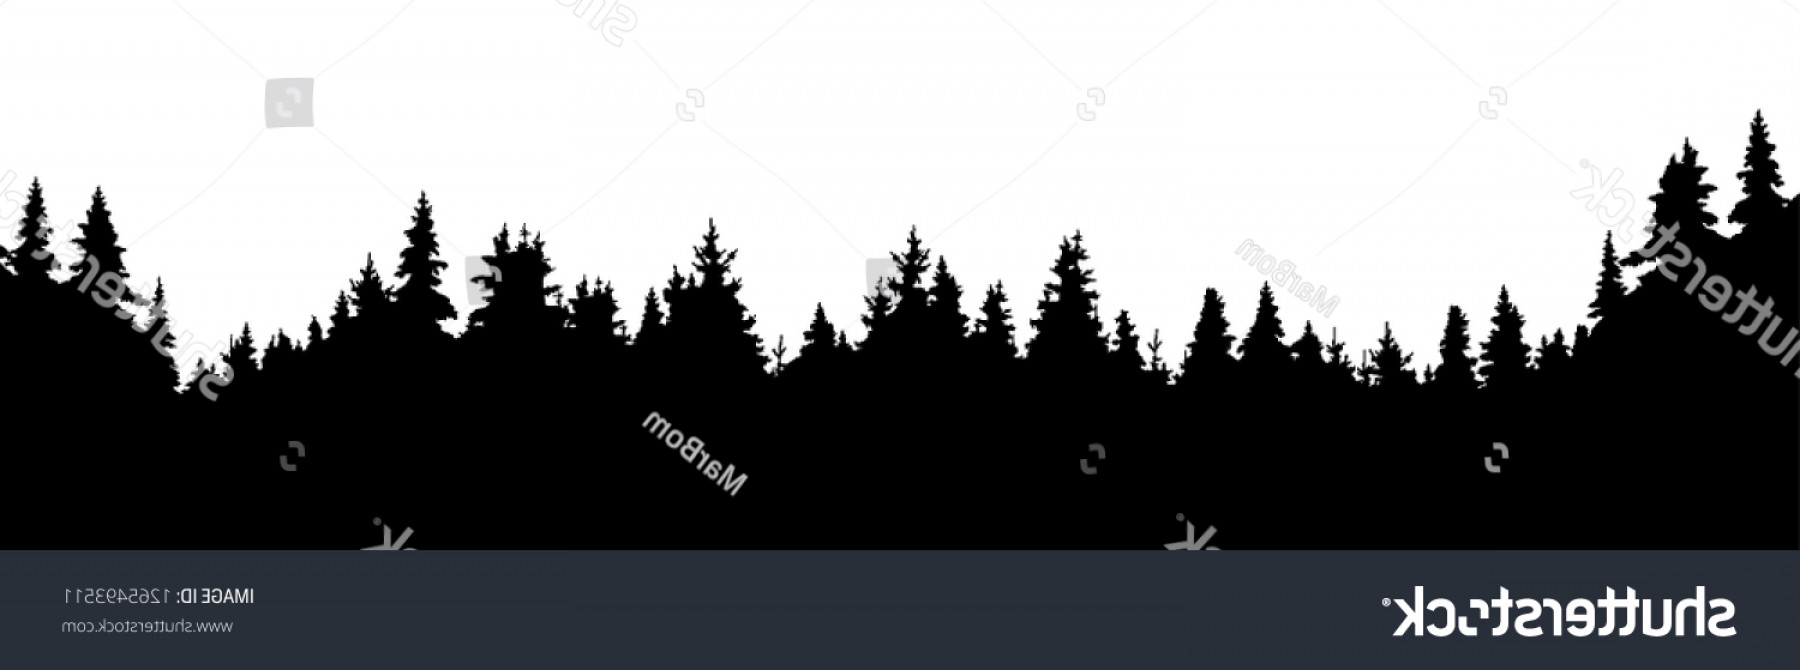 Download Get Pine Tree Line Silhouette Vector - Polamu-cuy